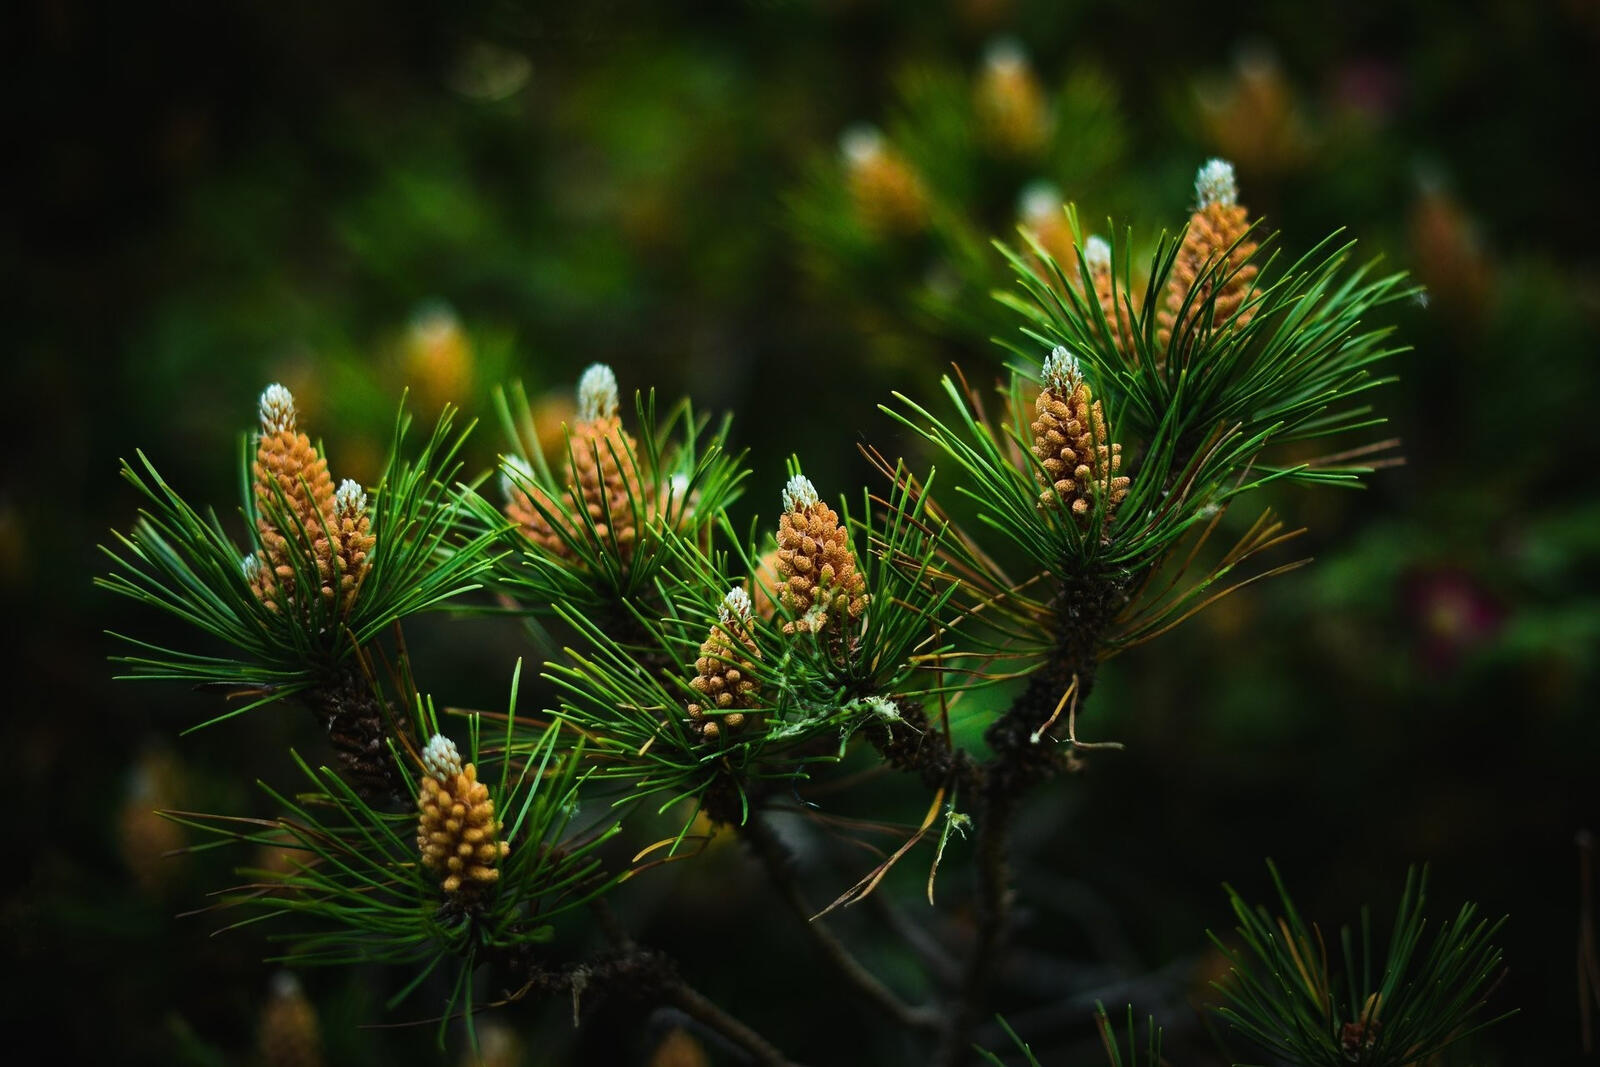 Free photo Small pine cones on branches with green needles